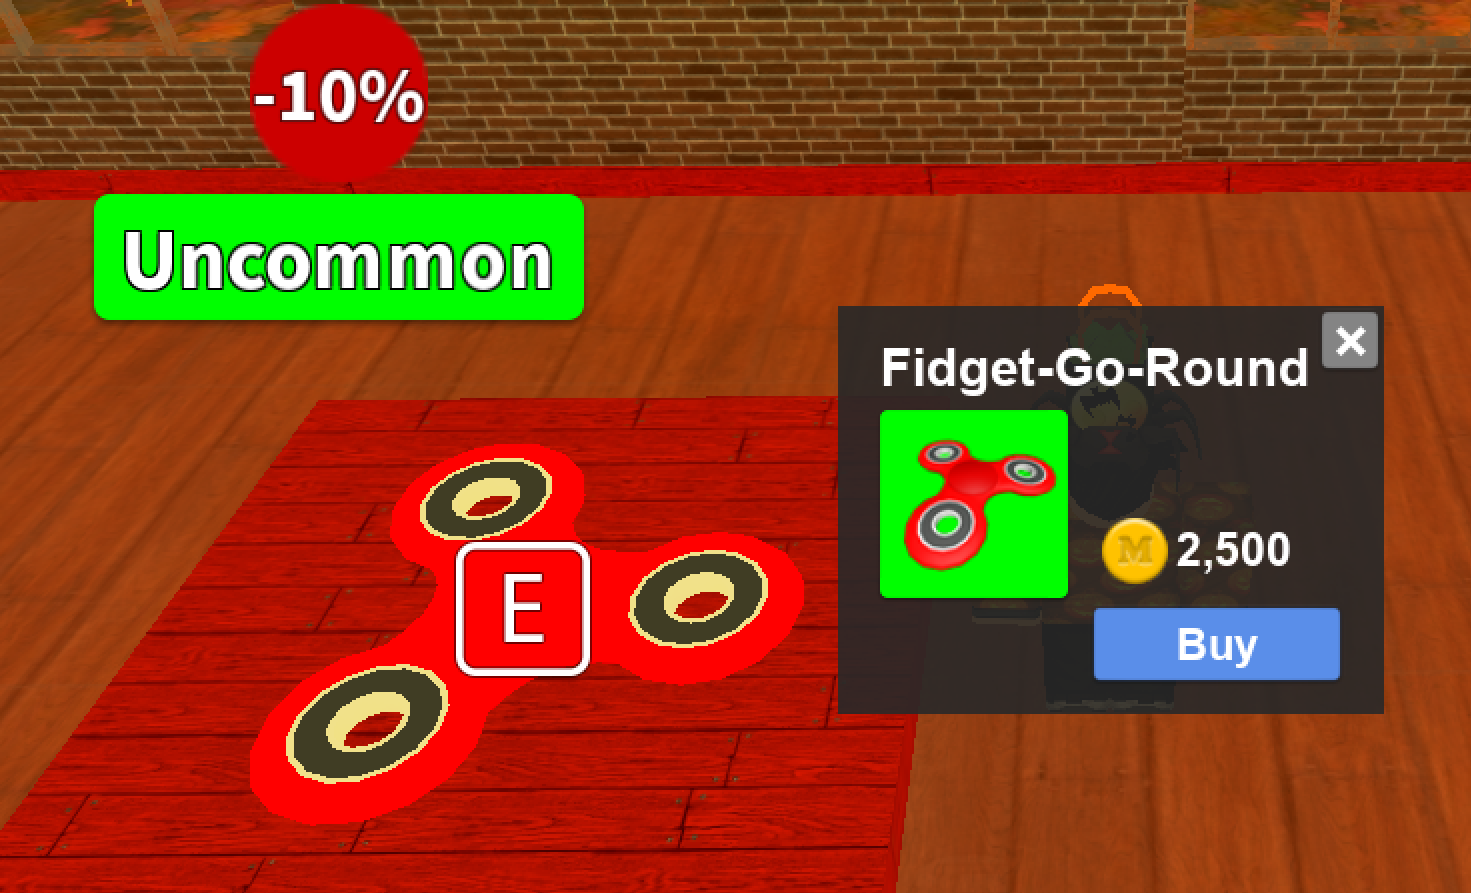 Furniture Work At A Pizza Place Wiki Fandom - fireworks gear allowed work at a pizza place roblox